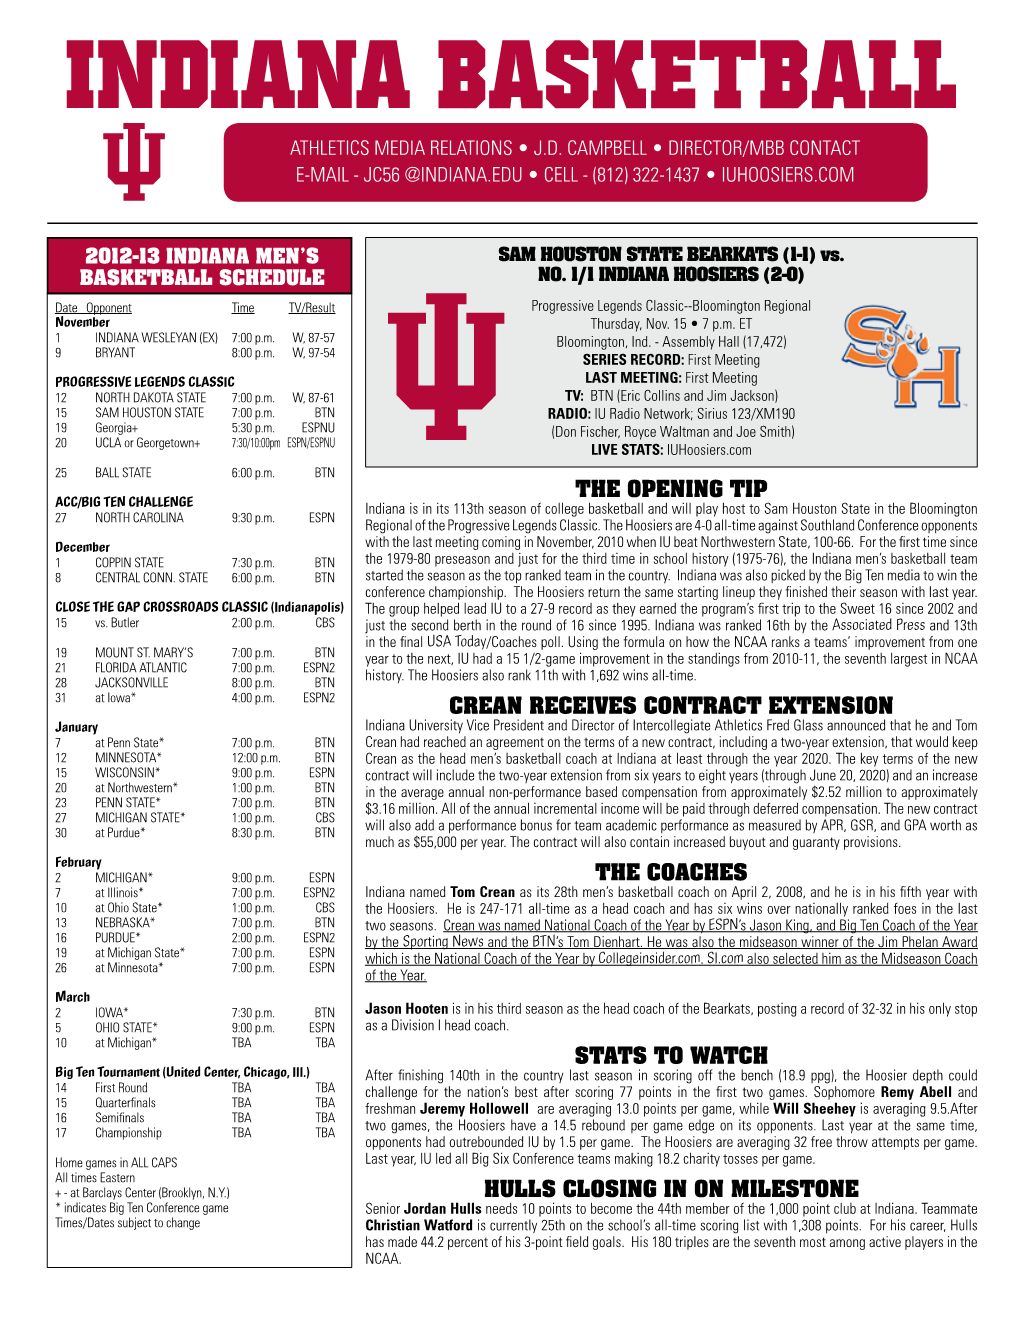 ATHLETICS MEDIA RELATIONS • J.D. CAMPBELL • DIRECTOR/MBB CONTACT E-MAIL - JC56 @Indiana.Edu • CELL - (812) 322-1437 • IUHOOSIERS.COM